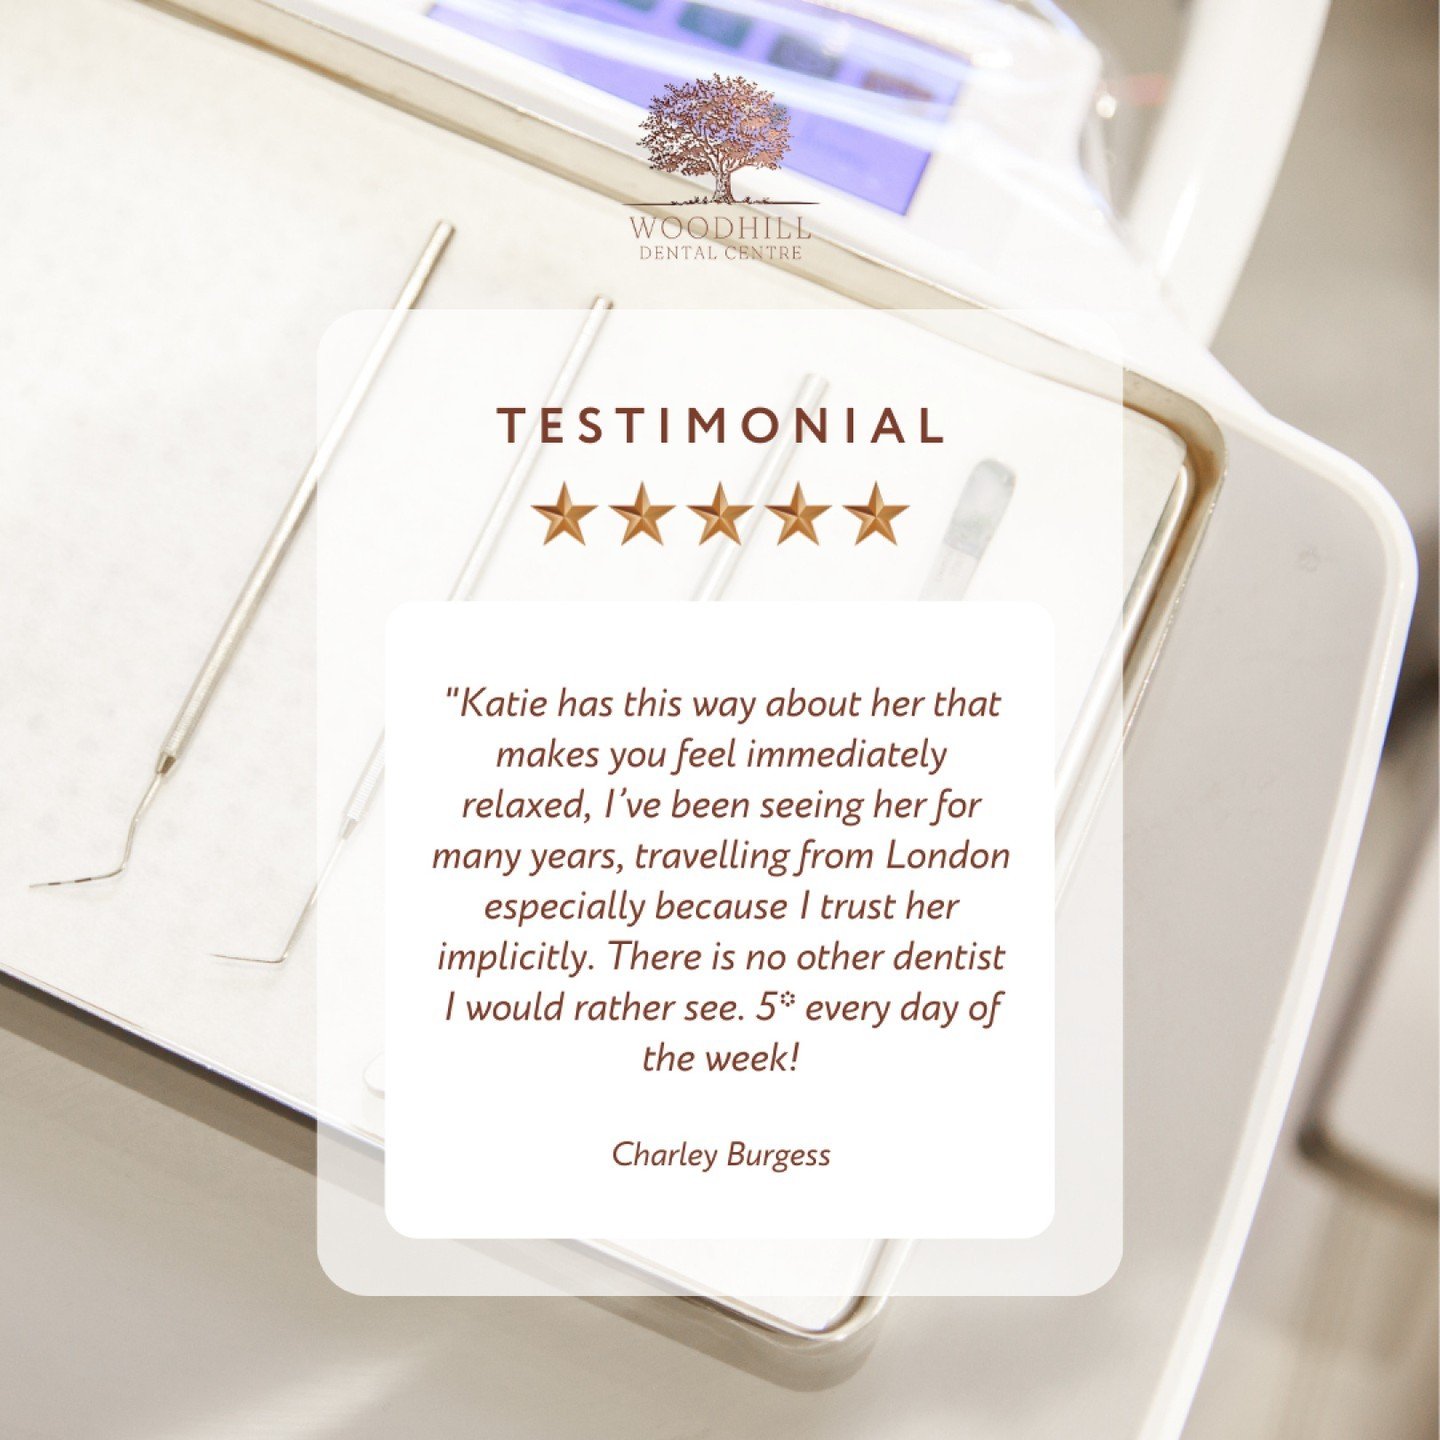 🌟 Thank you, Charley, for trusting us with your smile! 😃 We appreciate your amazing review and are delighted to have you as a patient!